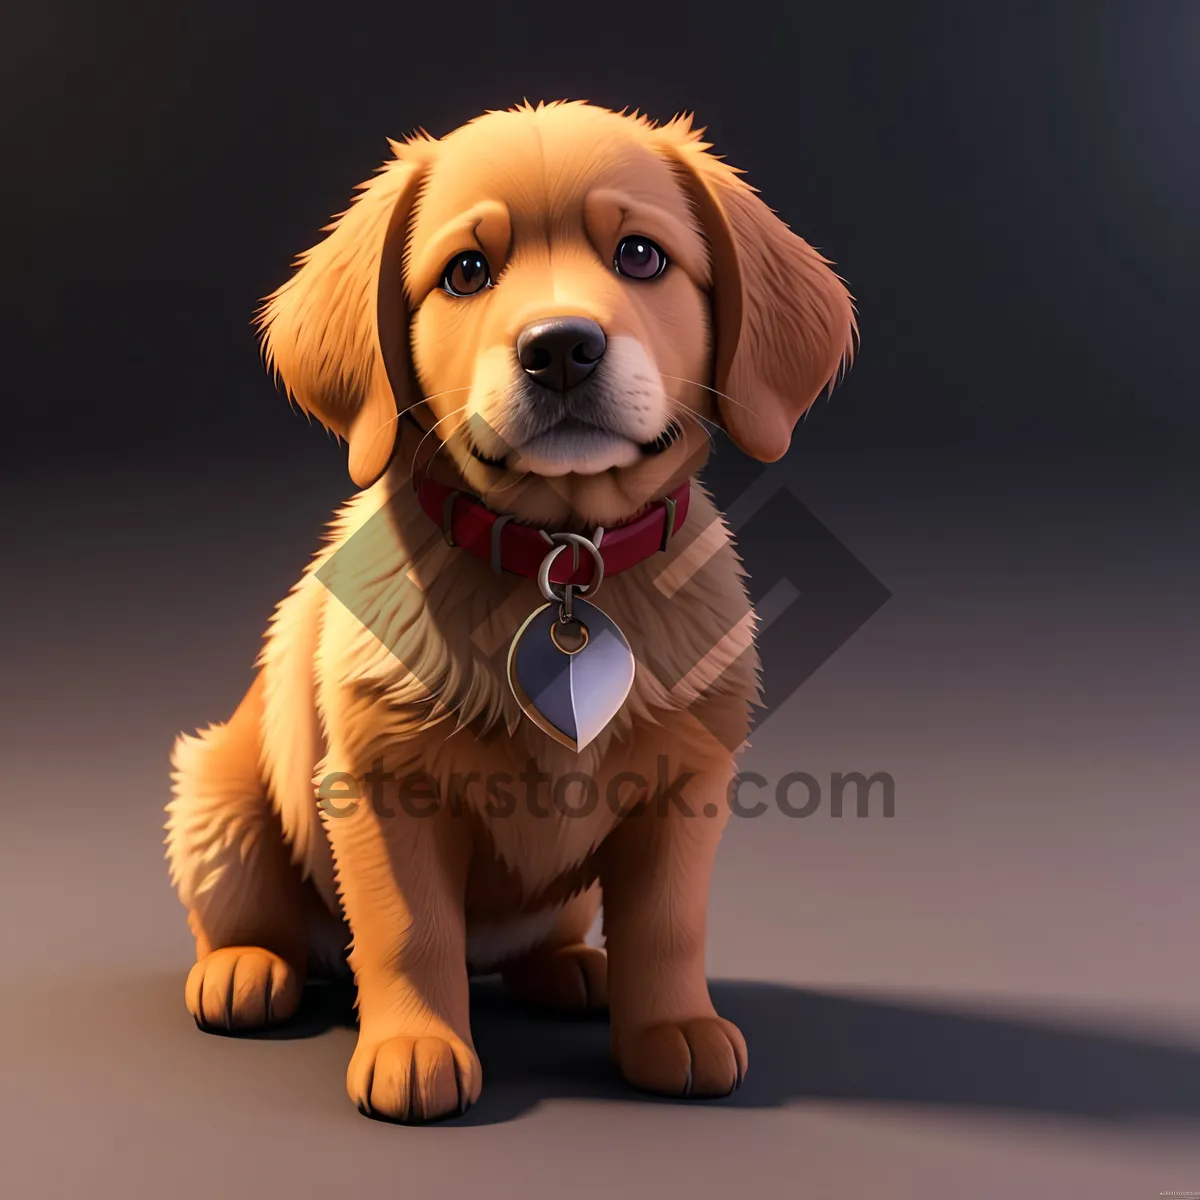 Picture of Cute Golden Retriever Puppy Portrait with Brown Fur